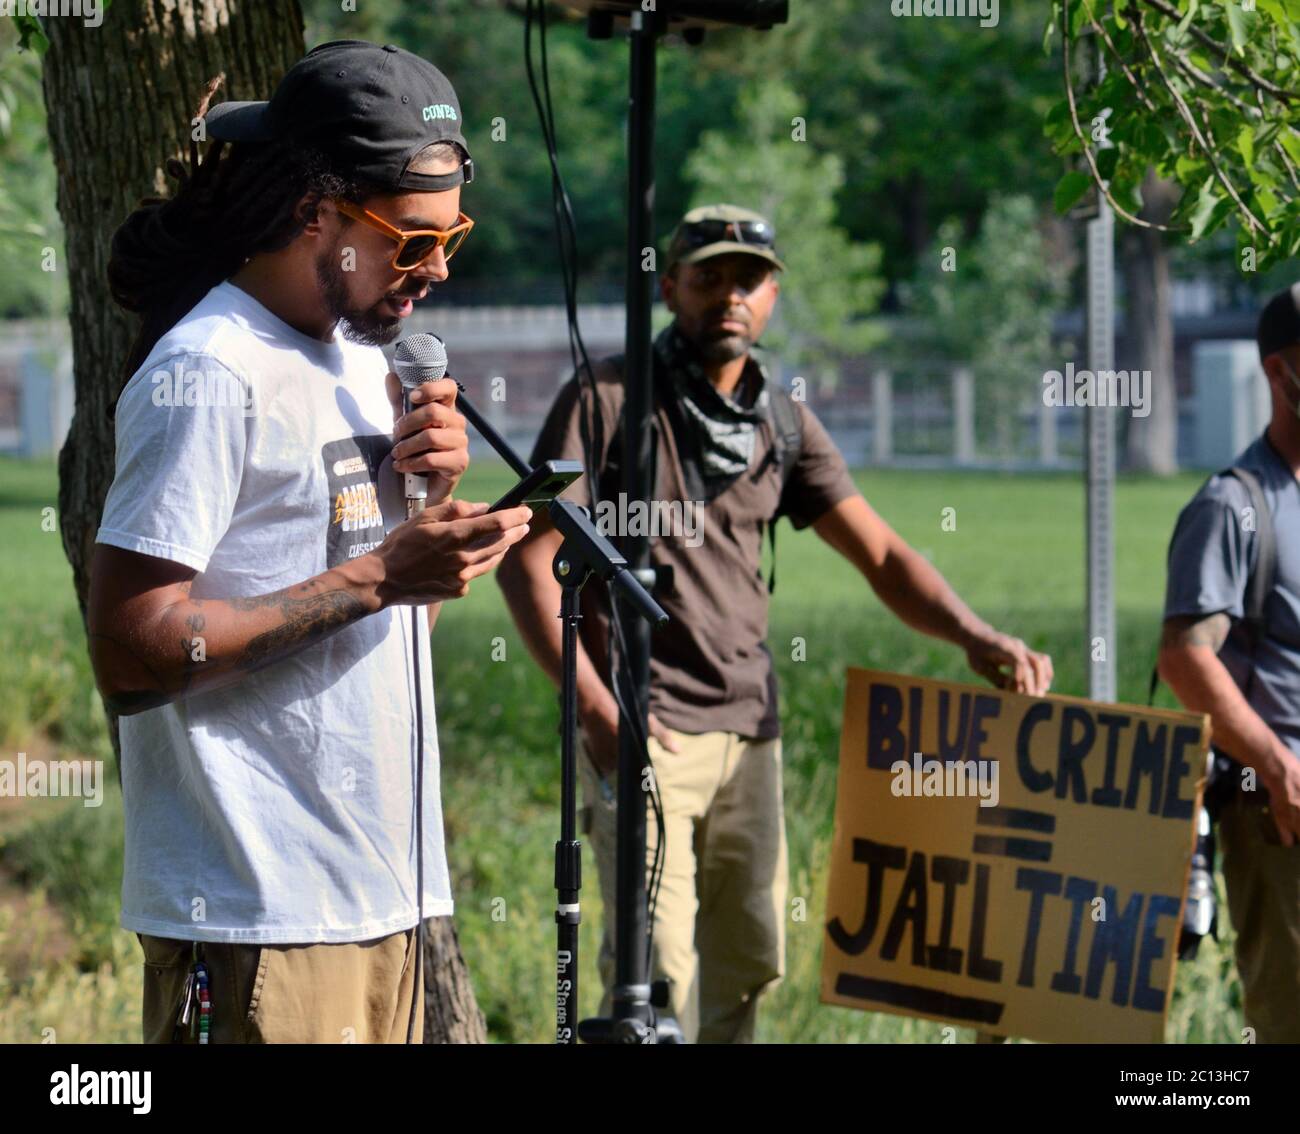 Speaking the names of African Americans killed by police in the United States before a Black Lives Matter demonstration in Boulder, CO, June 12, 2020. Stock Photo